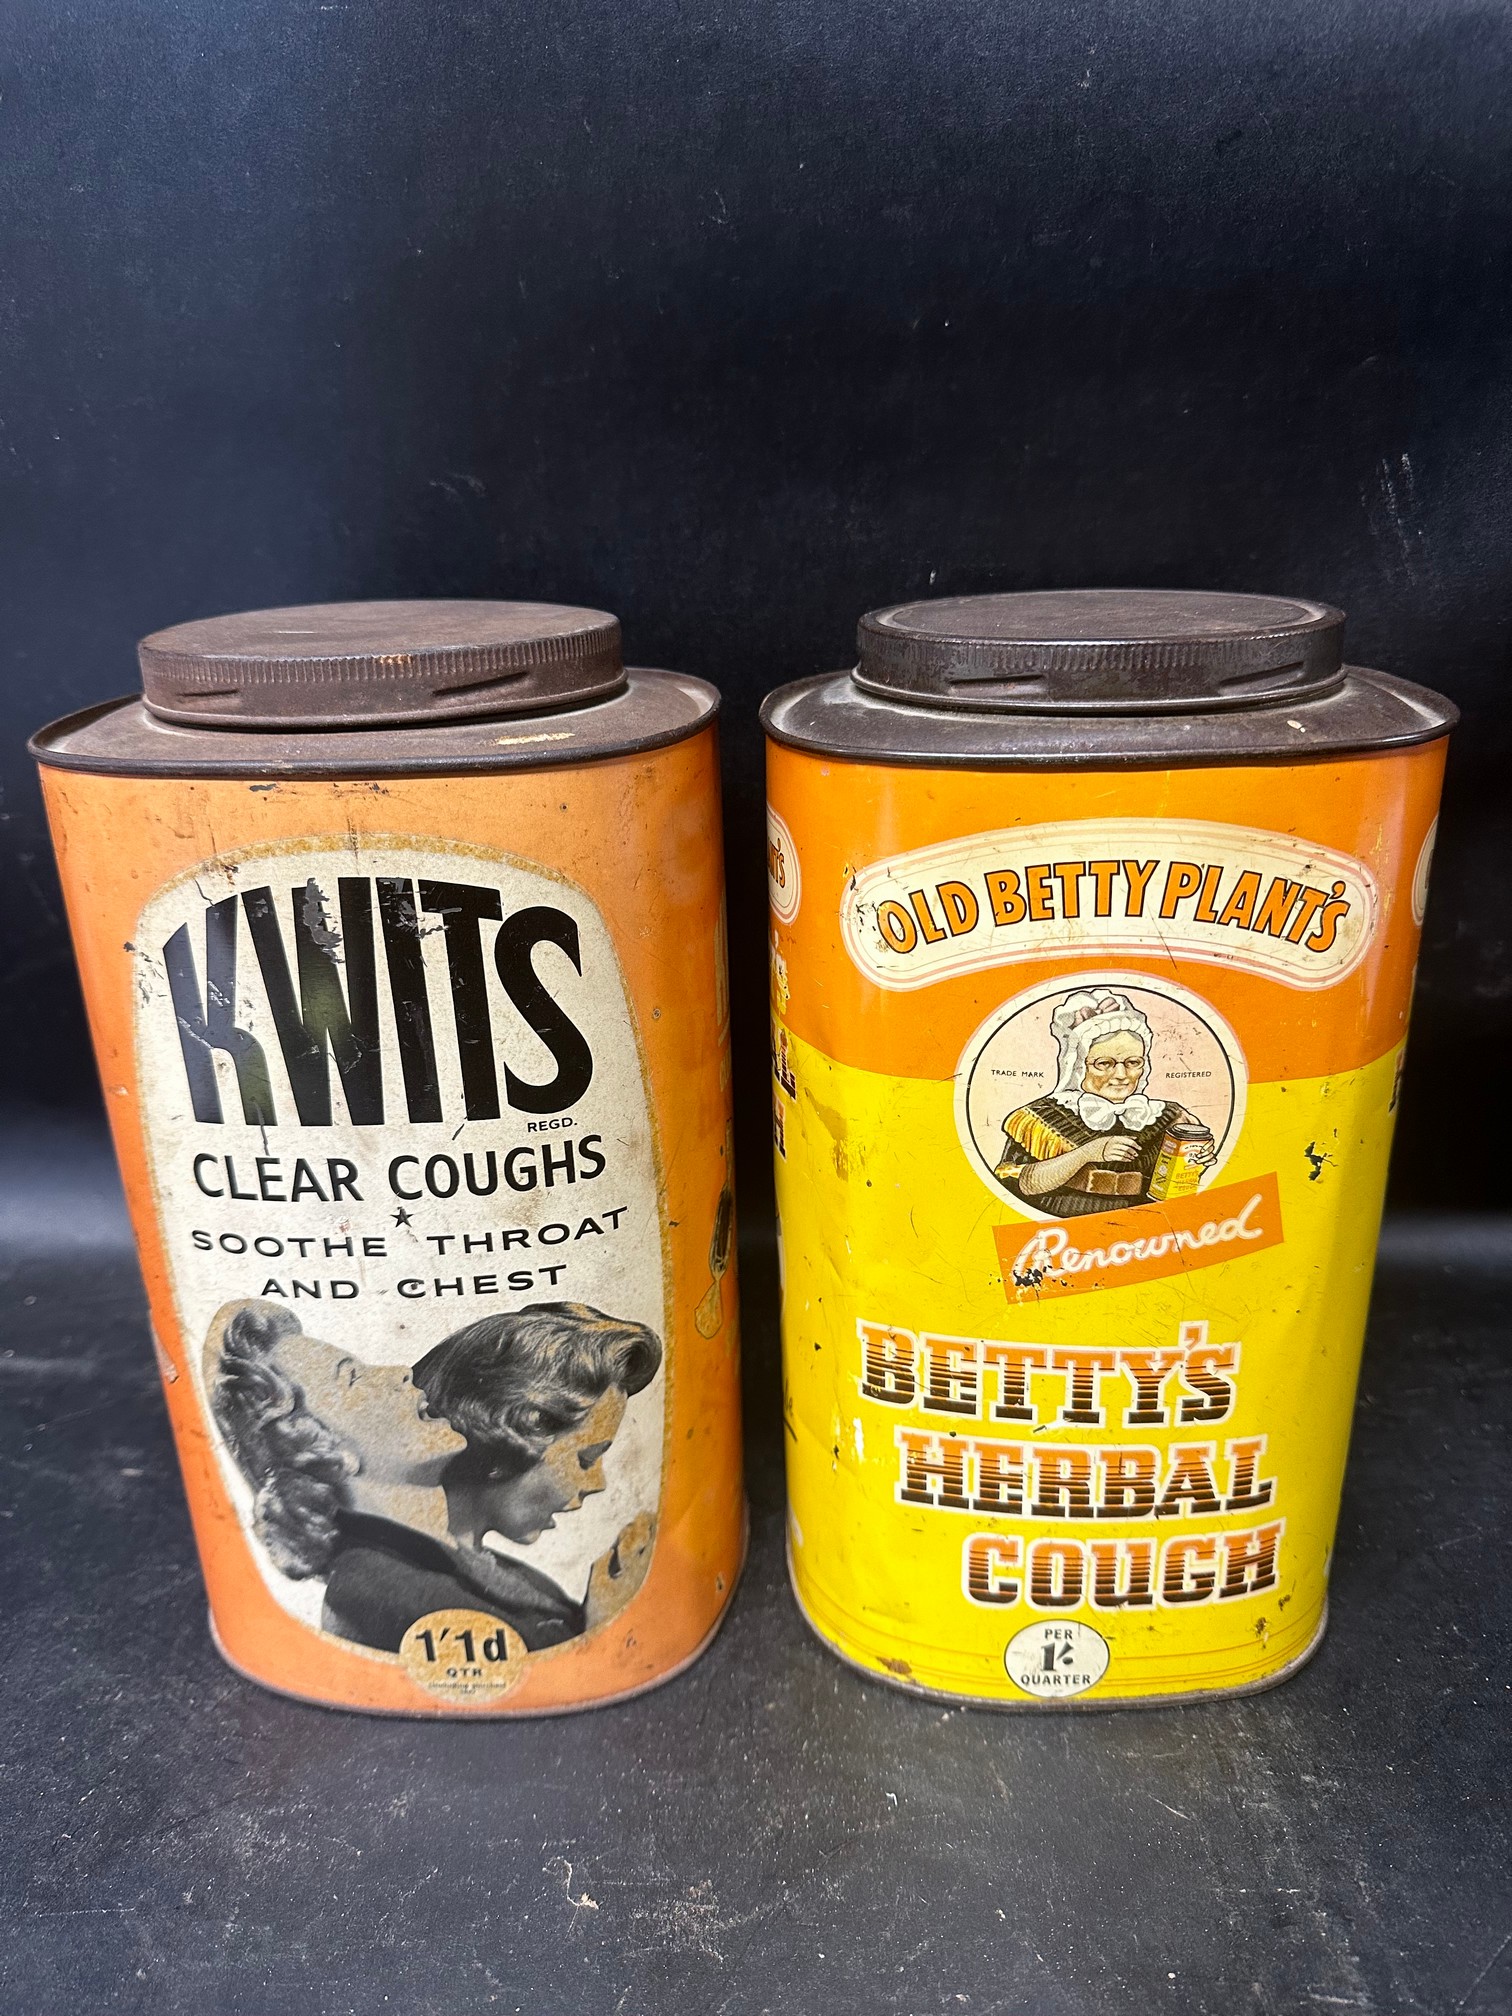 A Kwits Clear Coughs 5lbs tin (F.W. Hampshire & Co. Ltd. Sunnydale, Derby) and an Old Betty Plant'